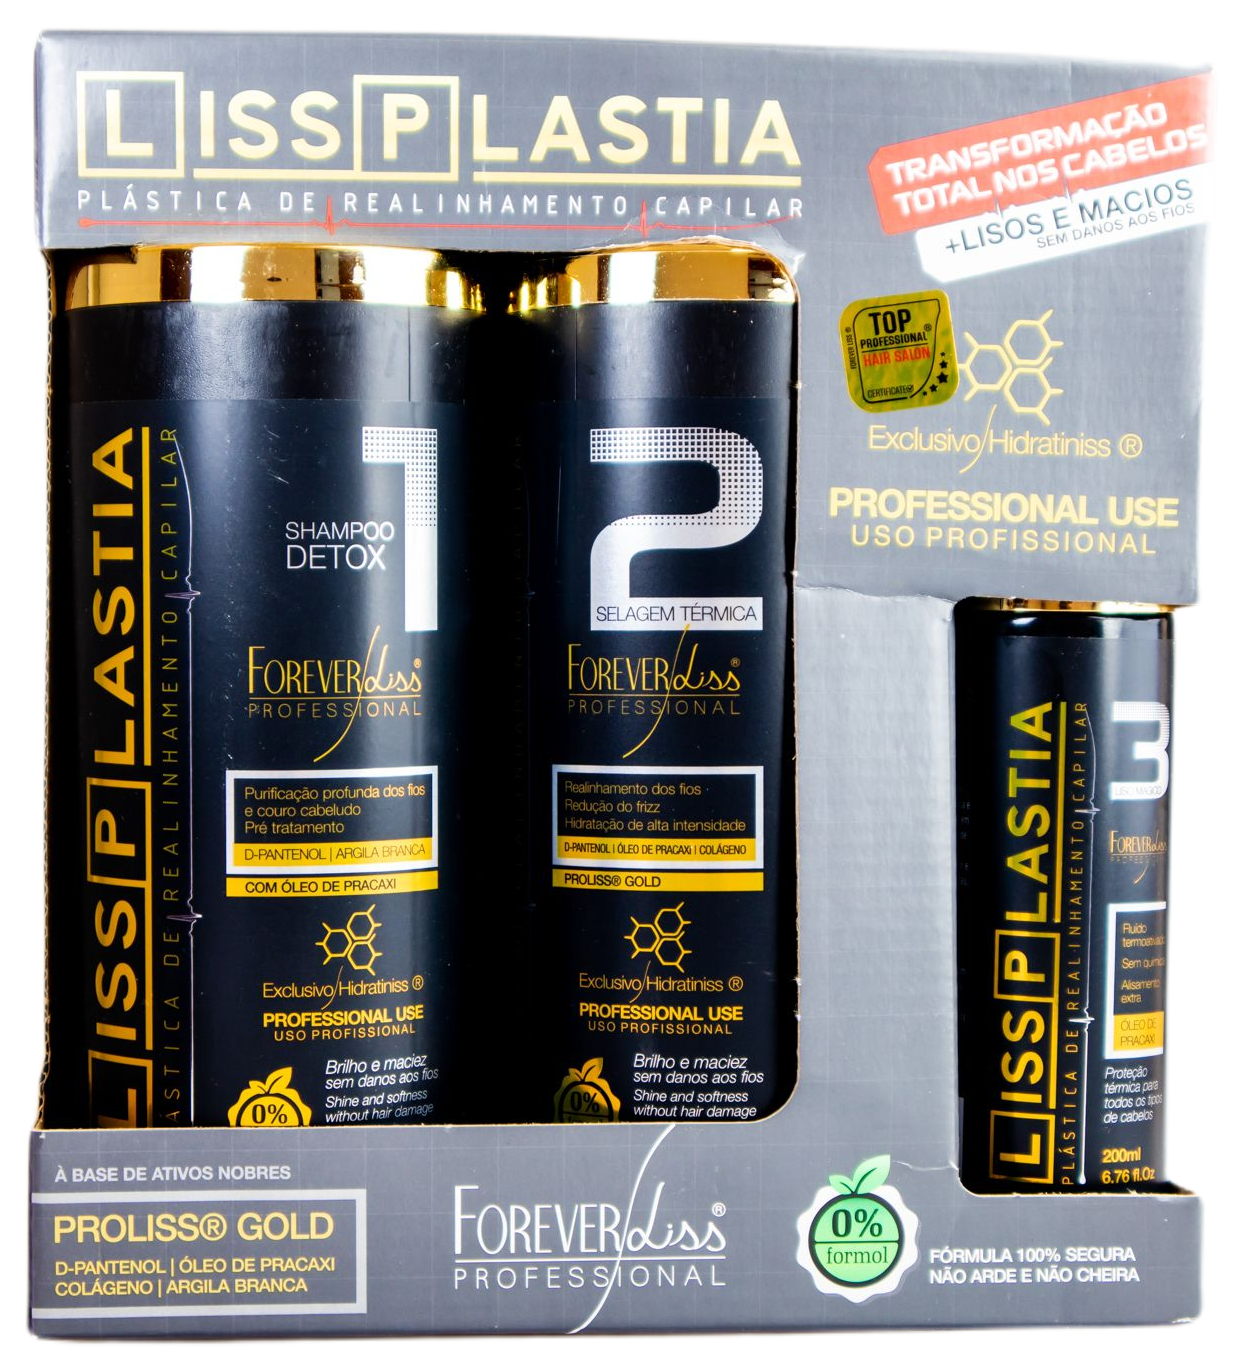 Forever Liss Brazilian Keratin Treatment Lissplastia Capillary Realignment Hair Treatment 3 Products - Forever Liss